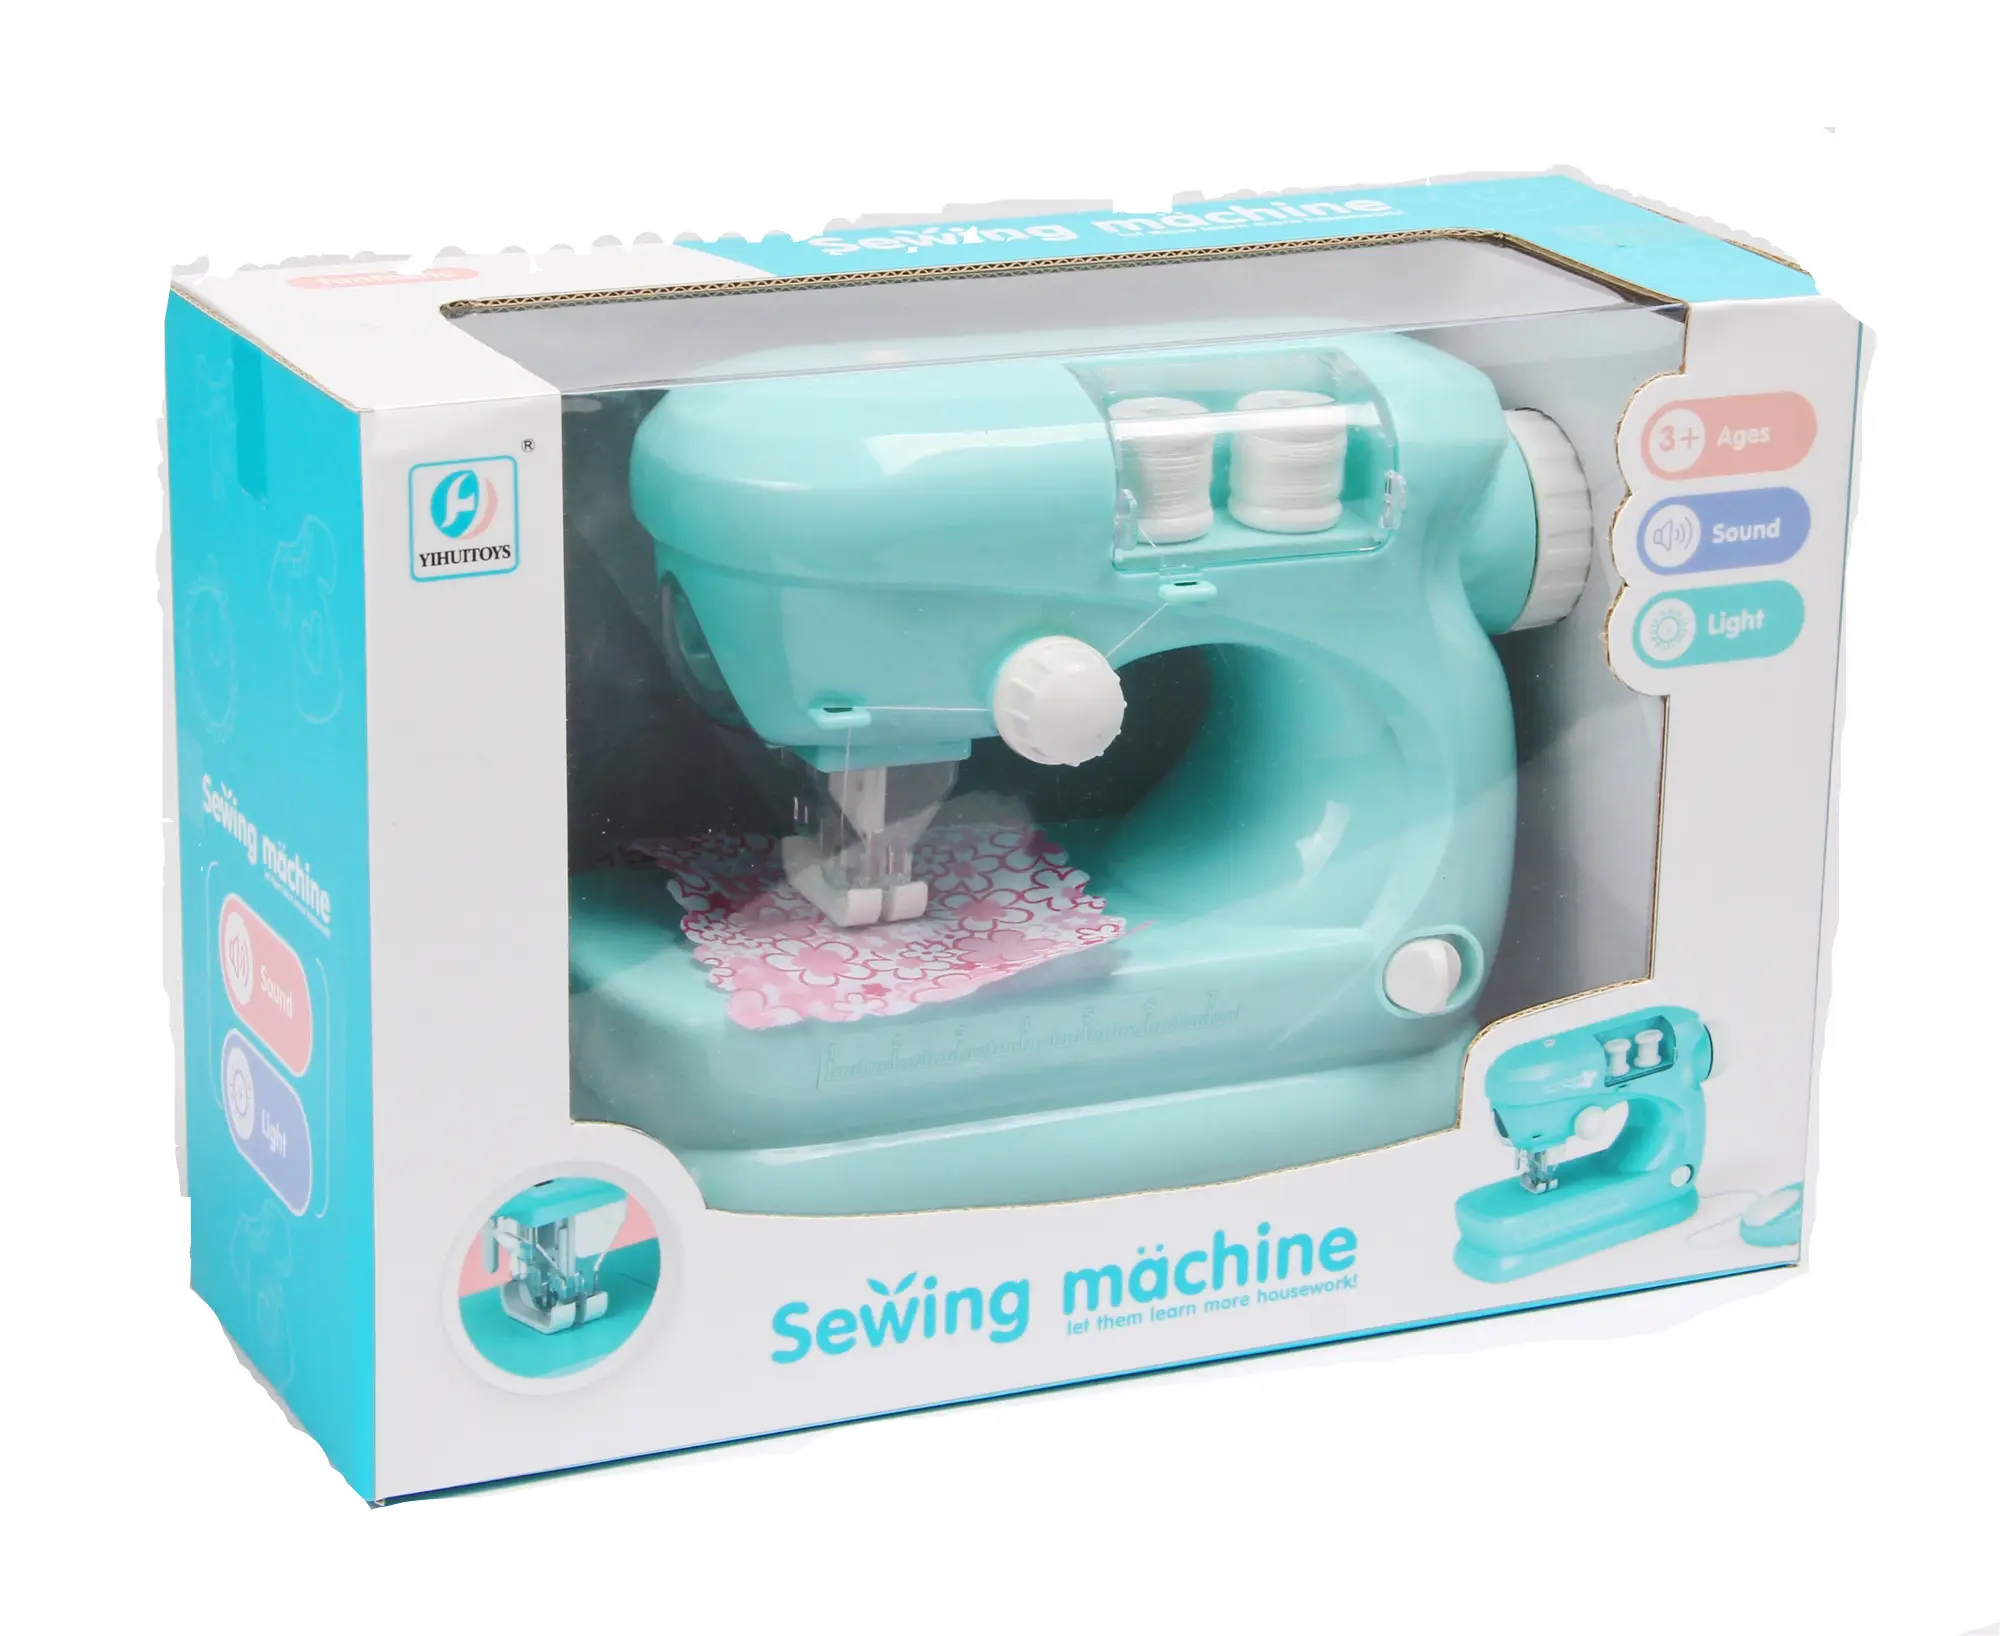 DF electronic toys sewing machines toy simulation kids play house best selling products 2020 in usa amazon household Appliances